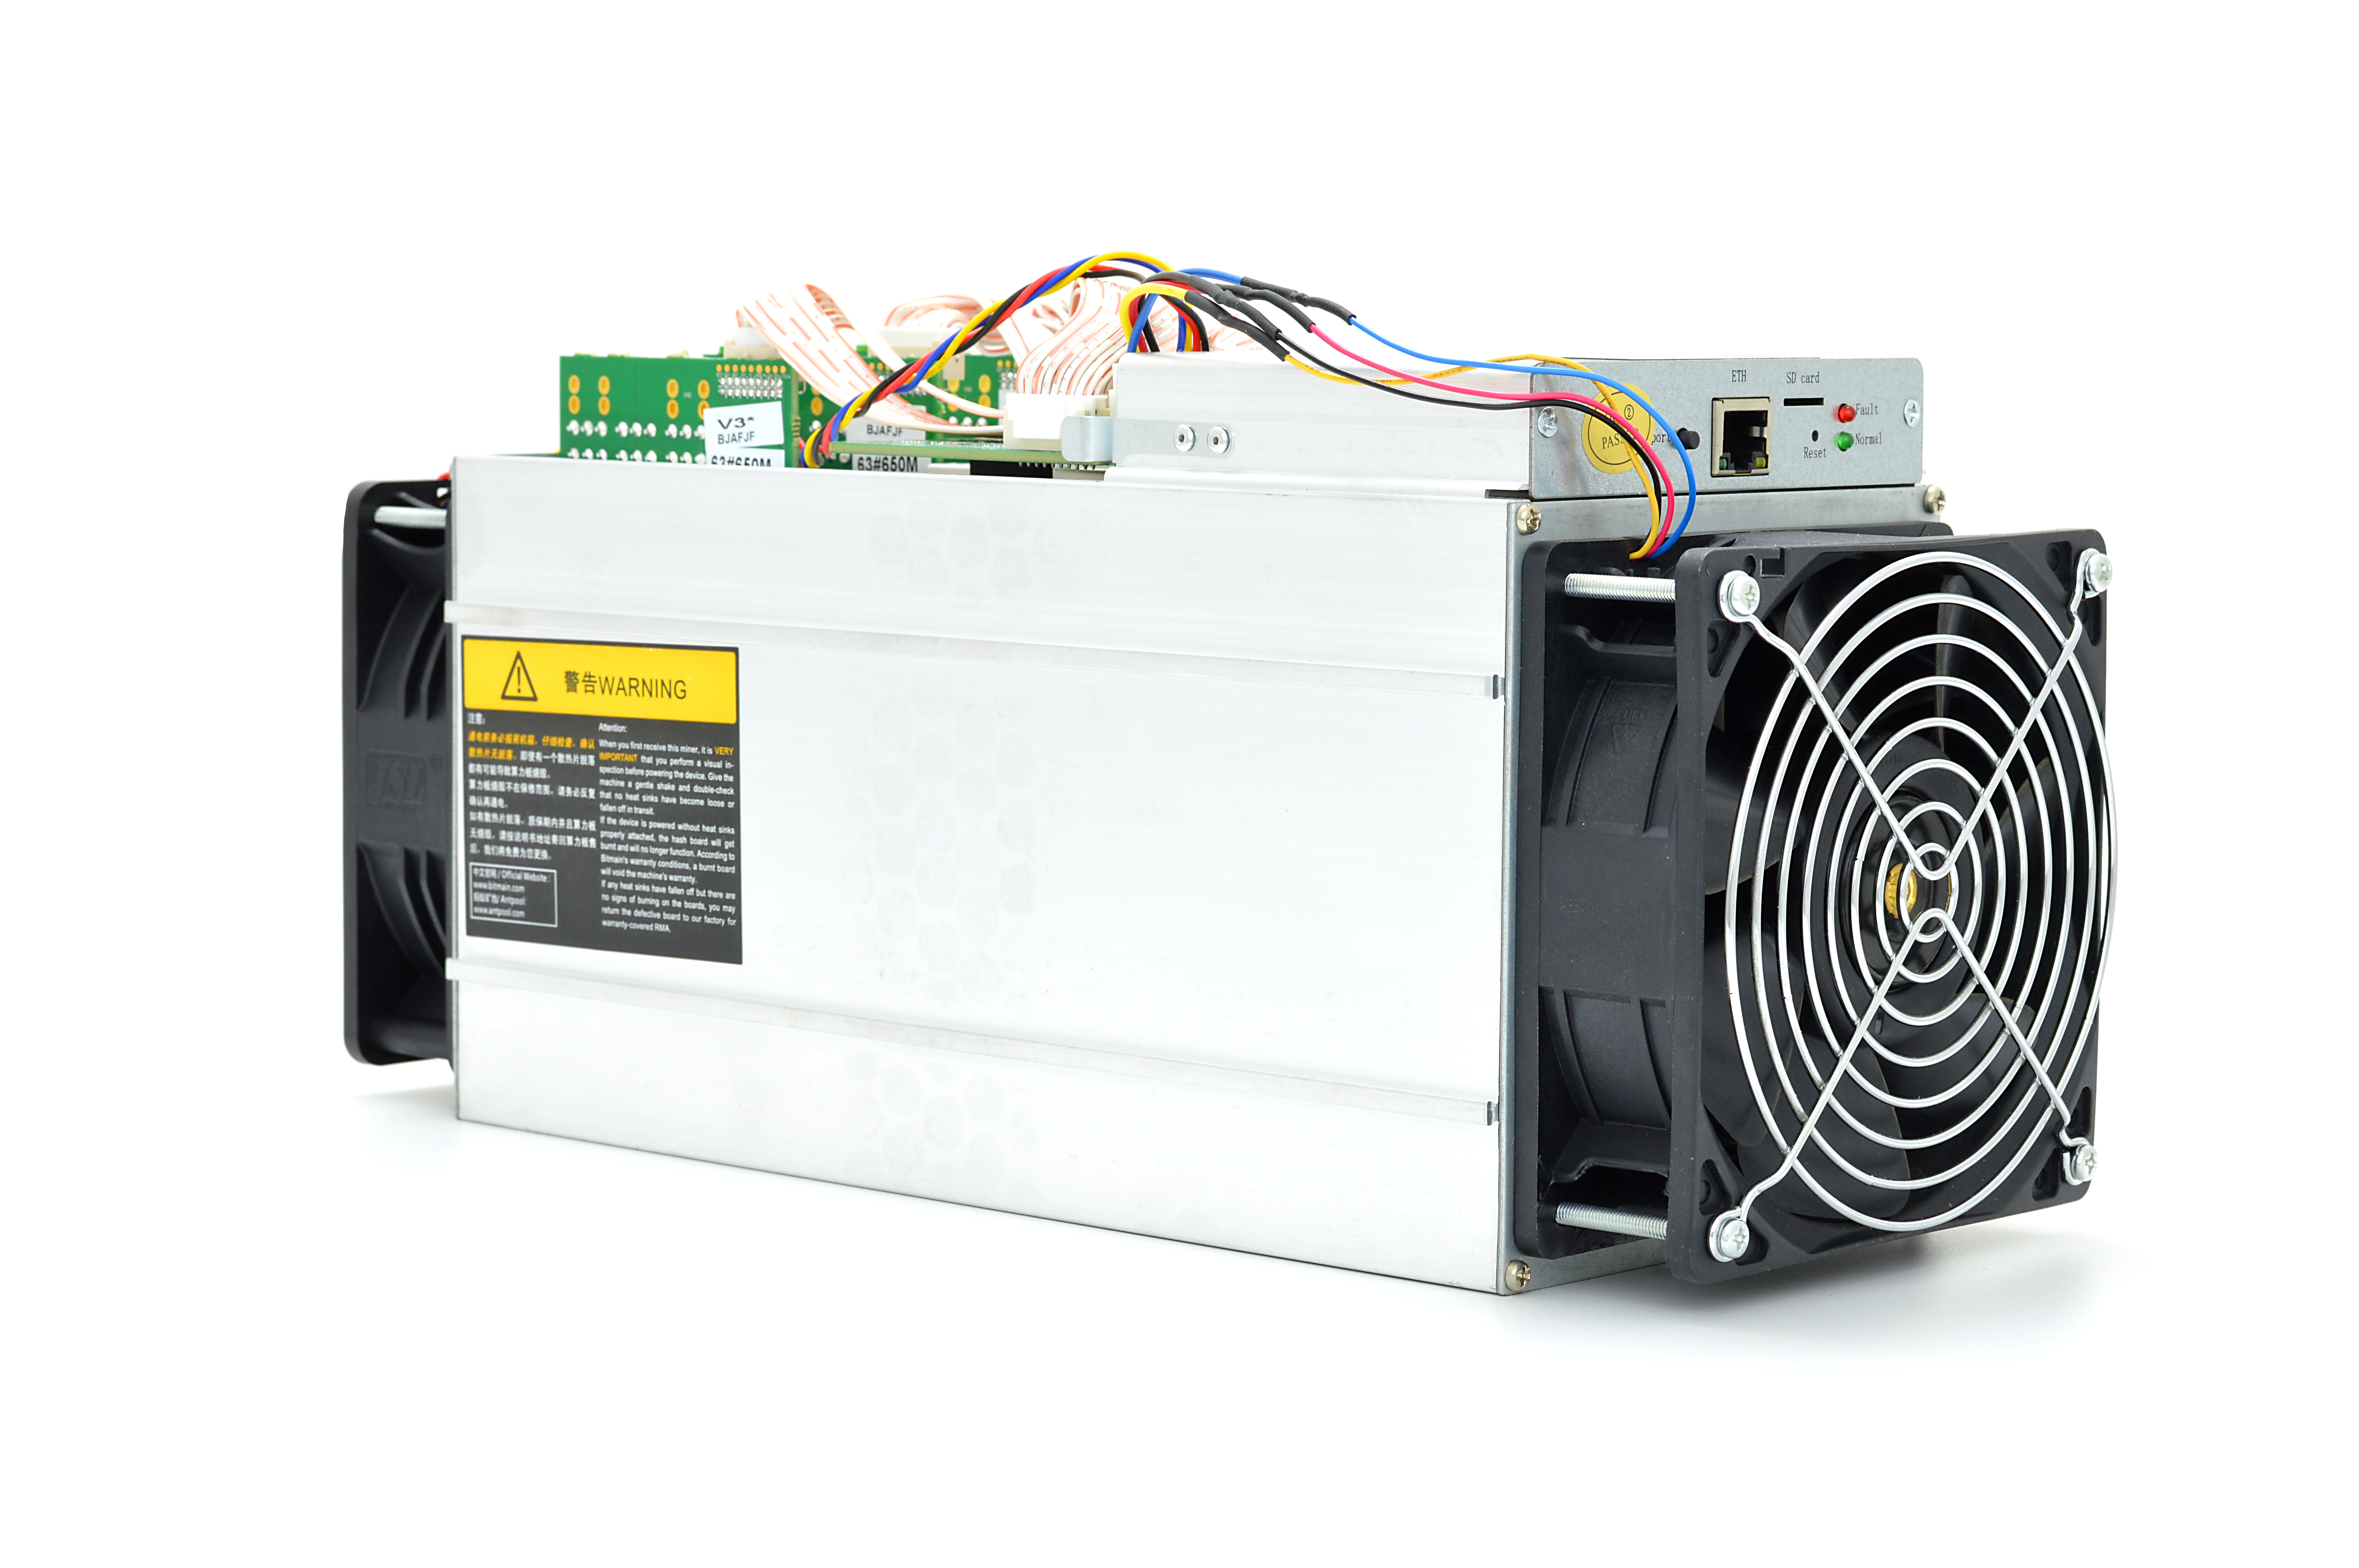 Antminer APW3++ for one Antminer